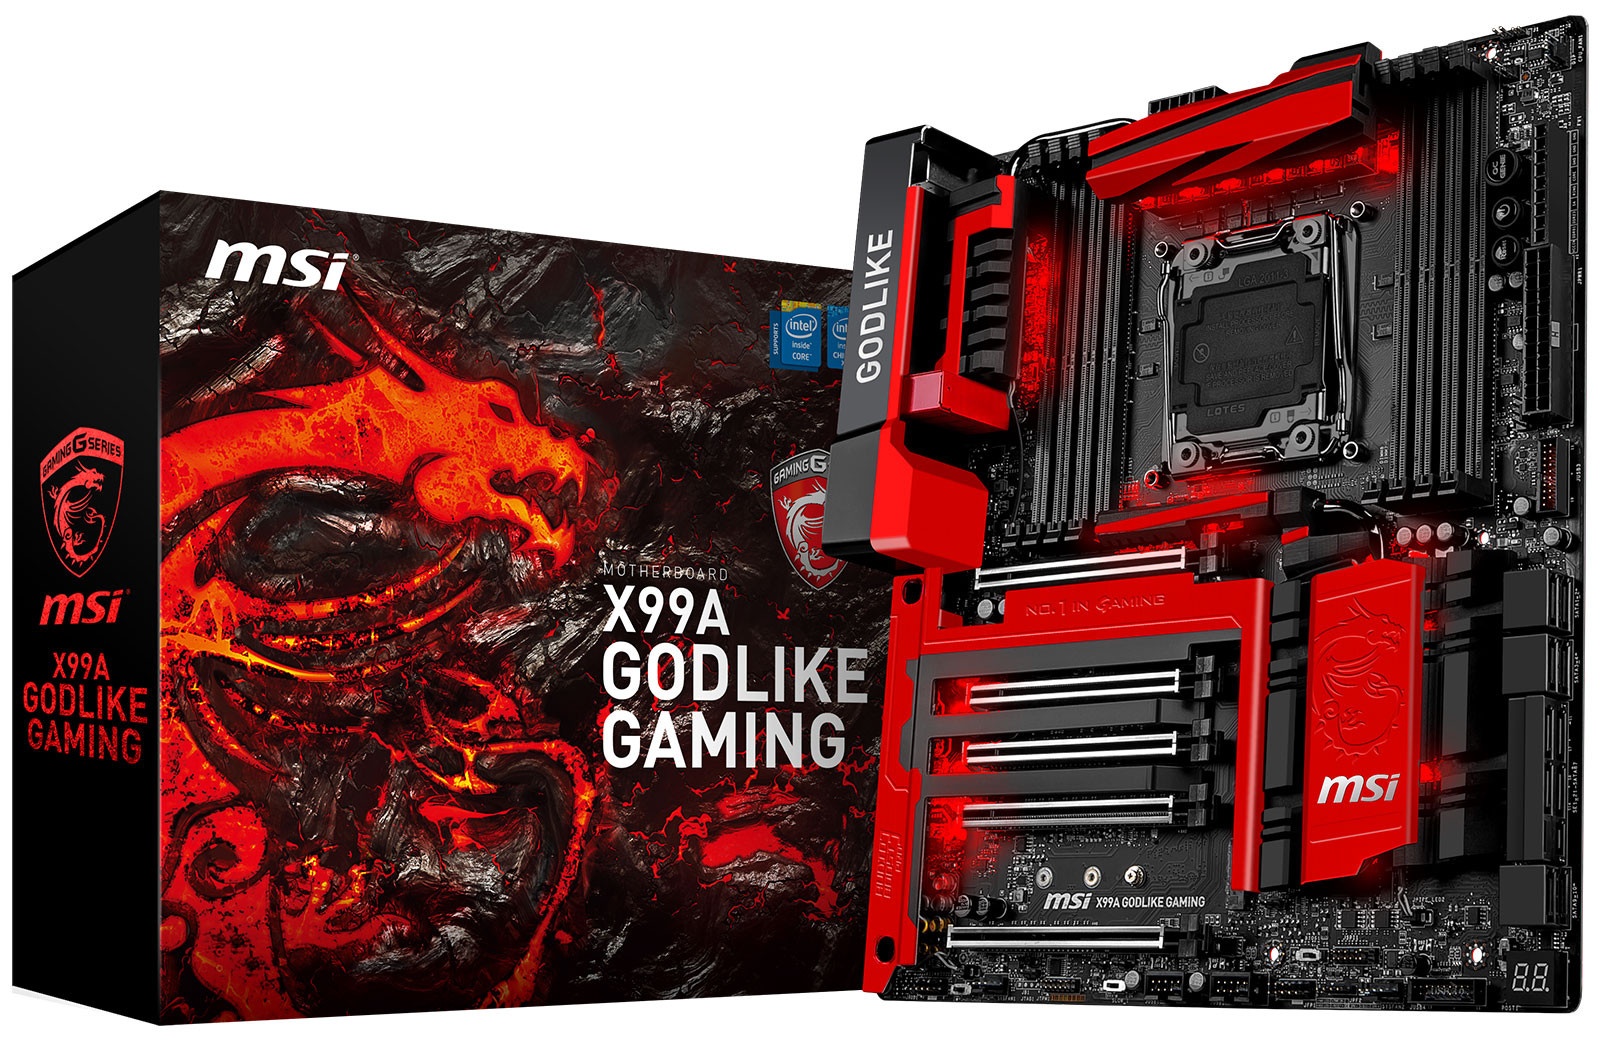 Media asset in full size related to 3dfxzone.it news item entitled as follows: MSI lancia ufficialmente la motherboard X99A GODLIKE GAMING ACK | Image Name: news22826_MSI-X99A-GODLIKE-GAMING-ACK_3.jpg